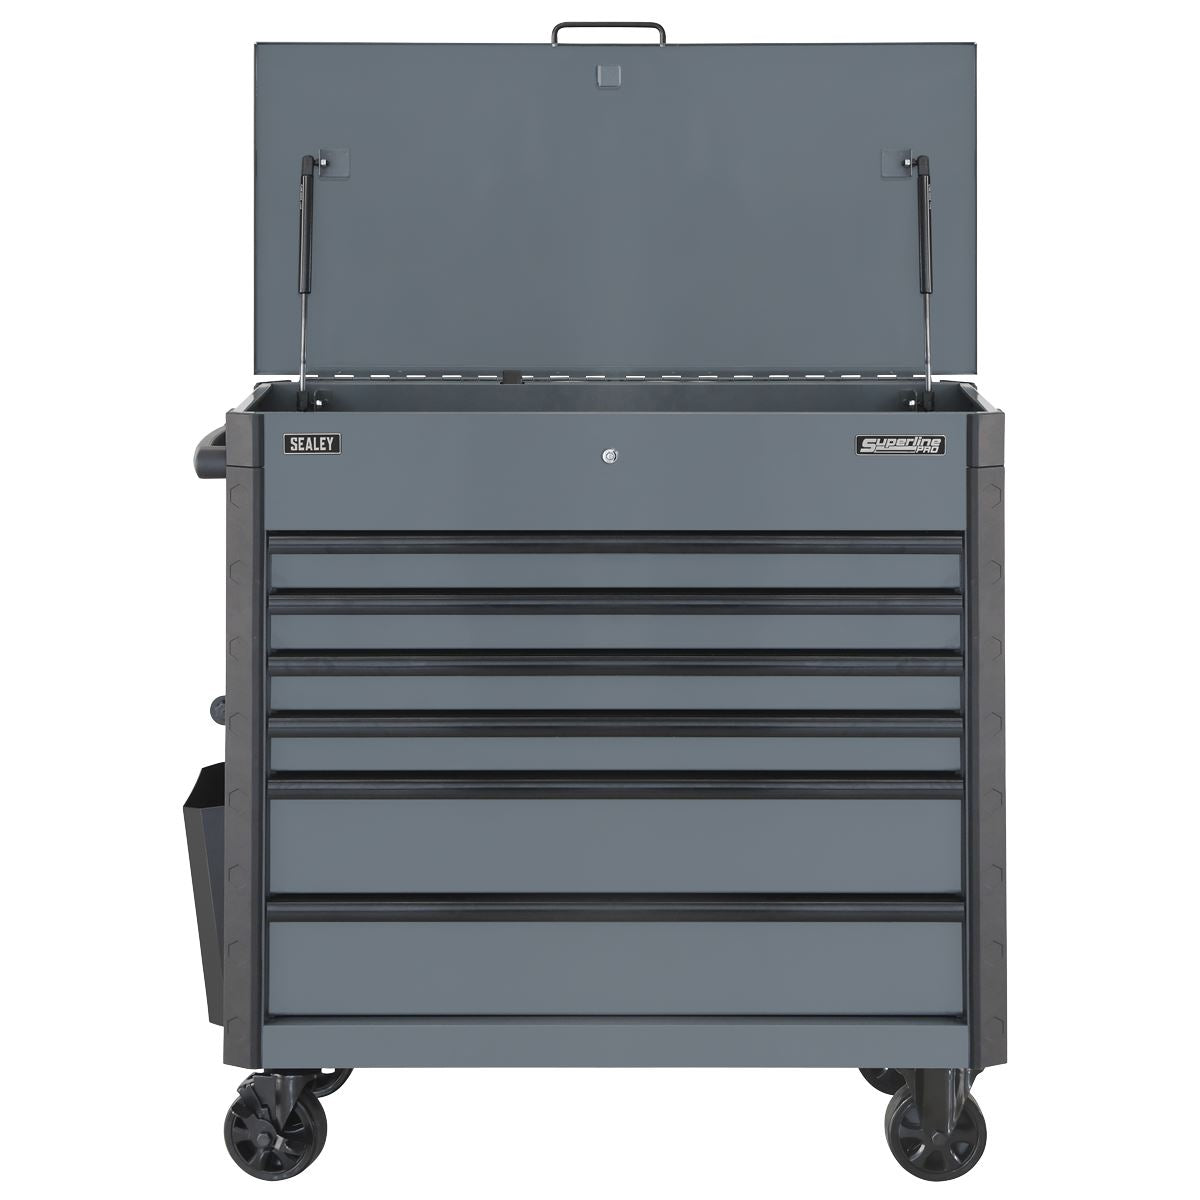 Sealey Superline Pro Tool Trolley 6 Drawer with Ball Bearing Slides - Grey